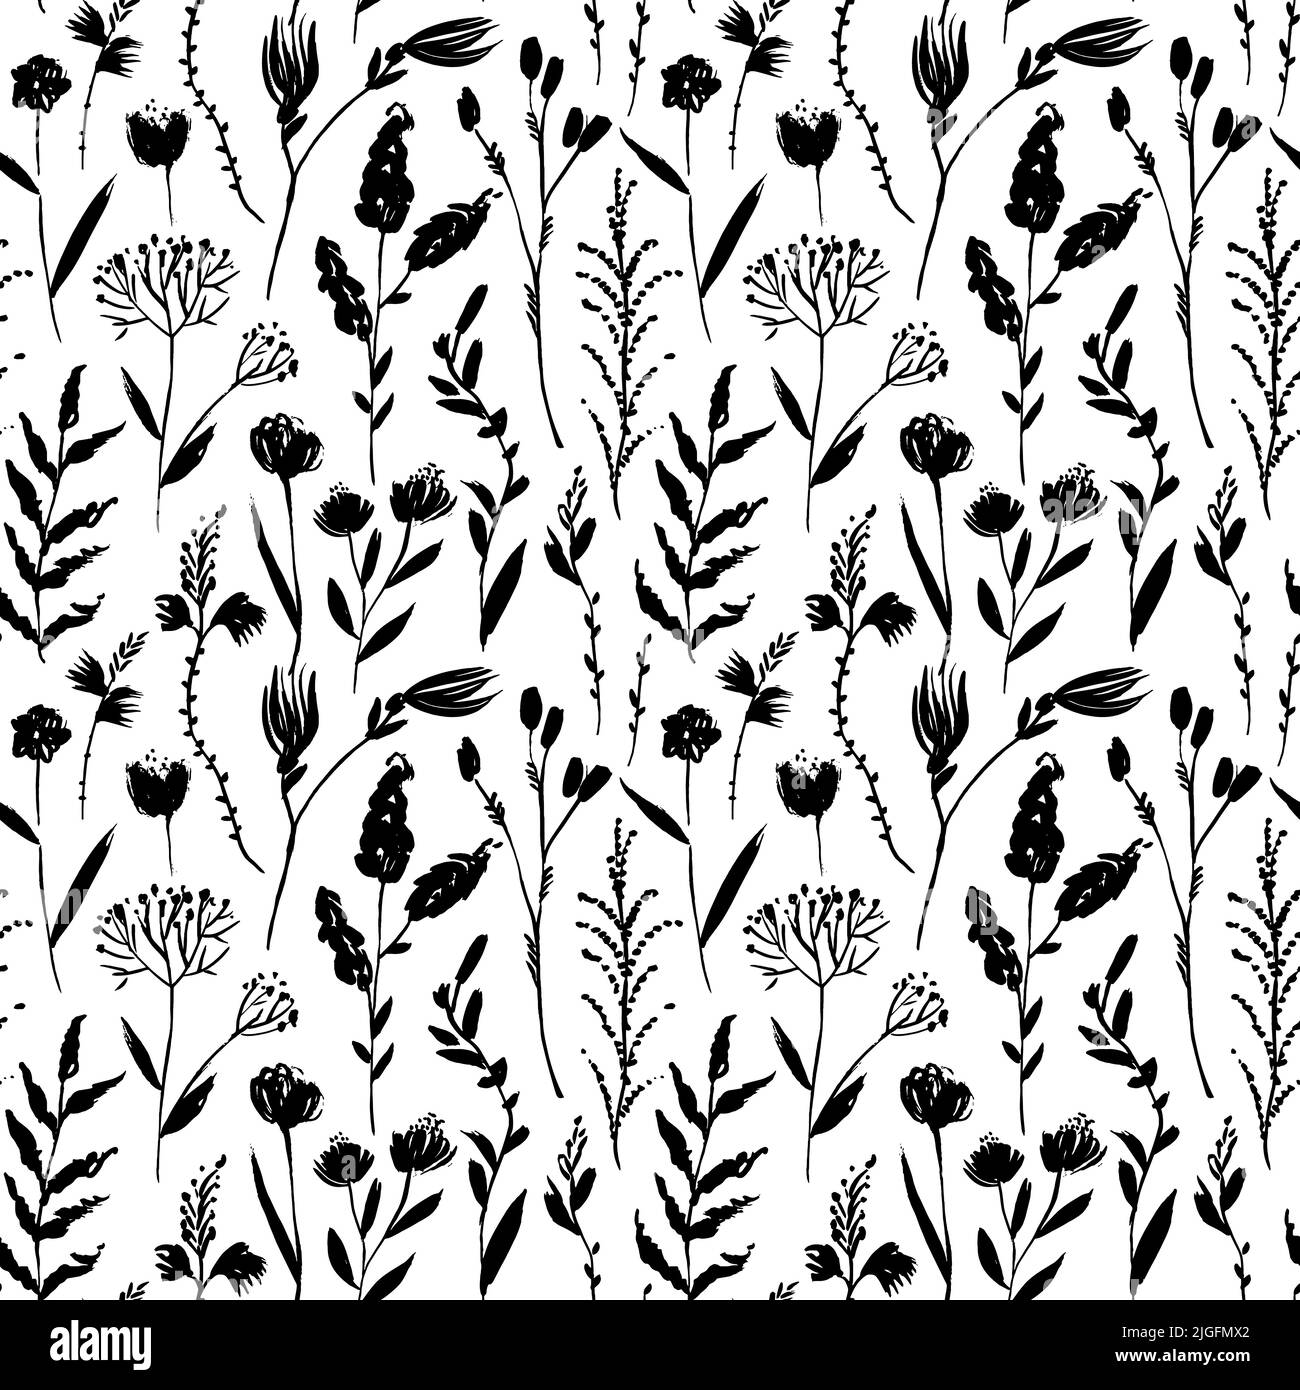 Wild floral hand drawn vector seamless pattern. Stock Vector